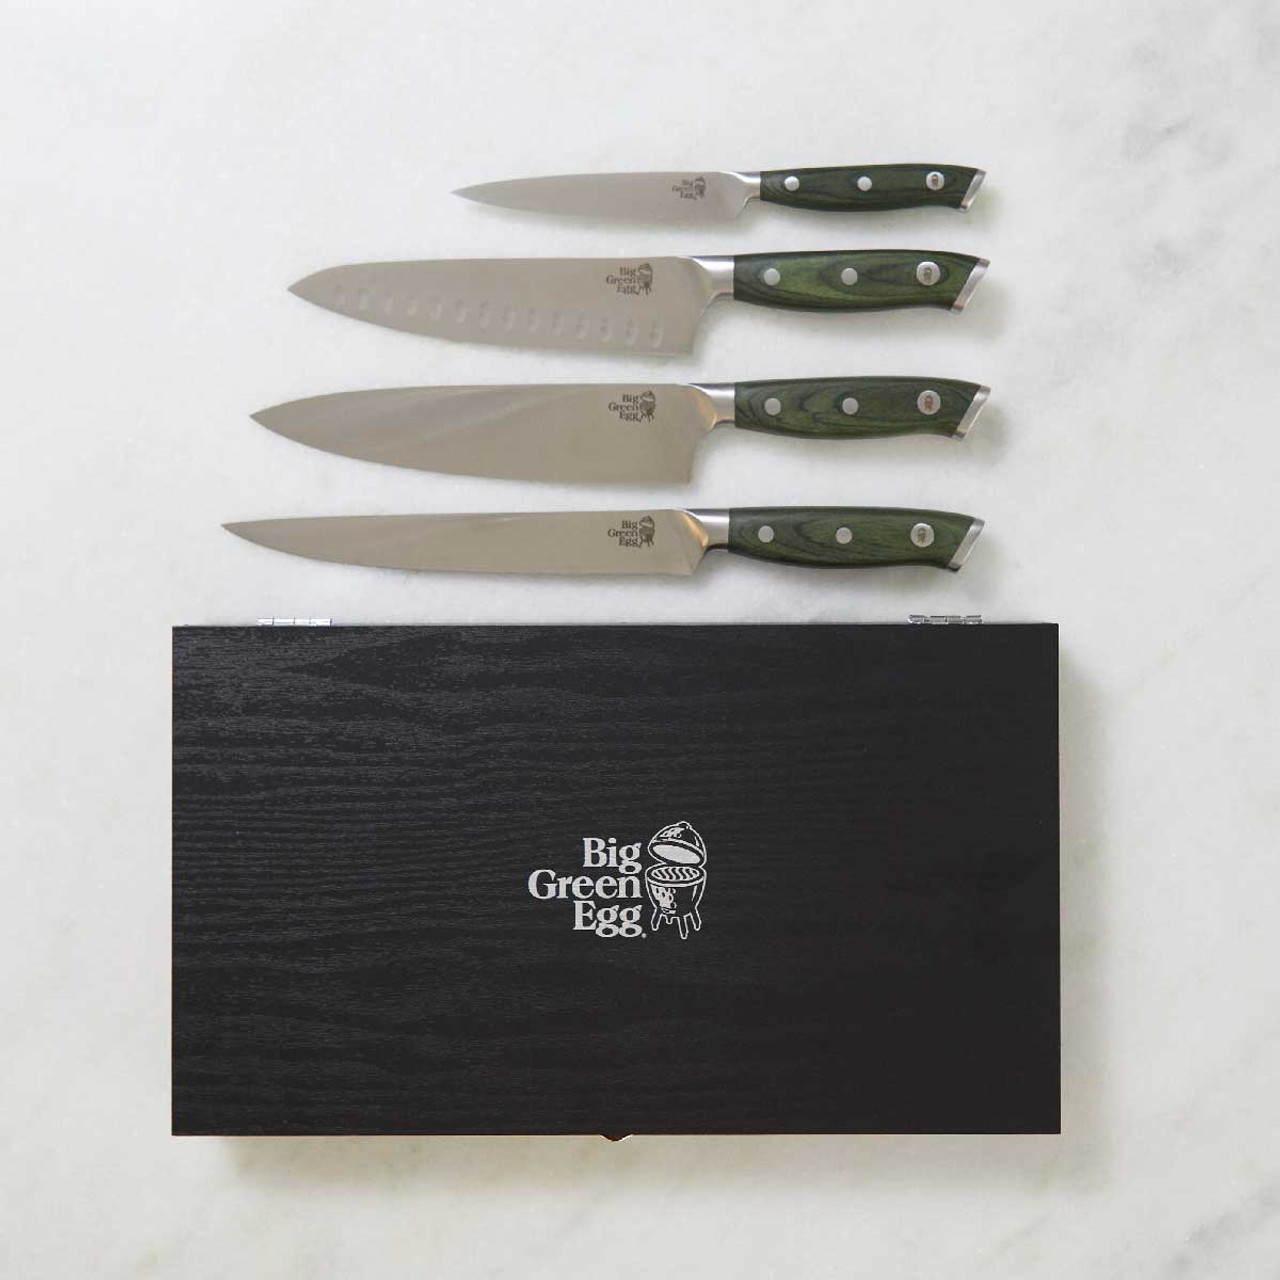 4-Piece Culinary Knife Set with Case - Big Green Egg